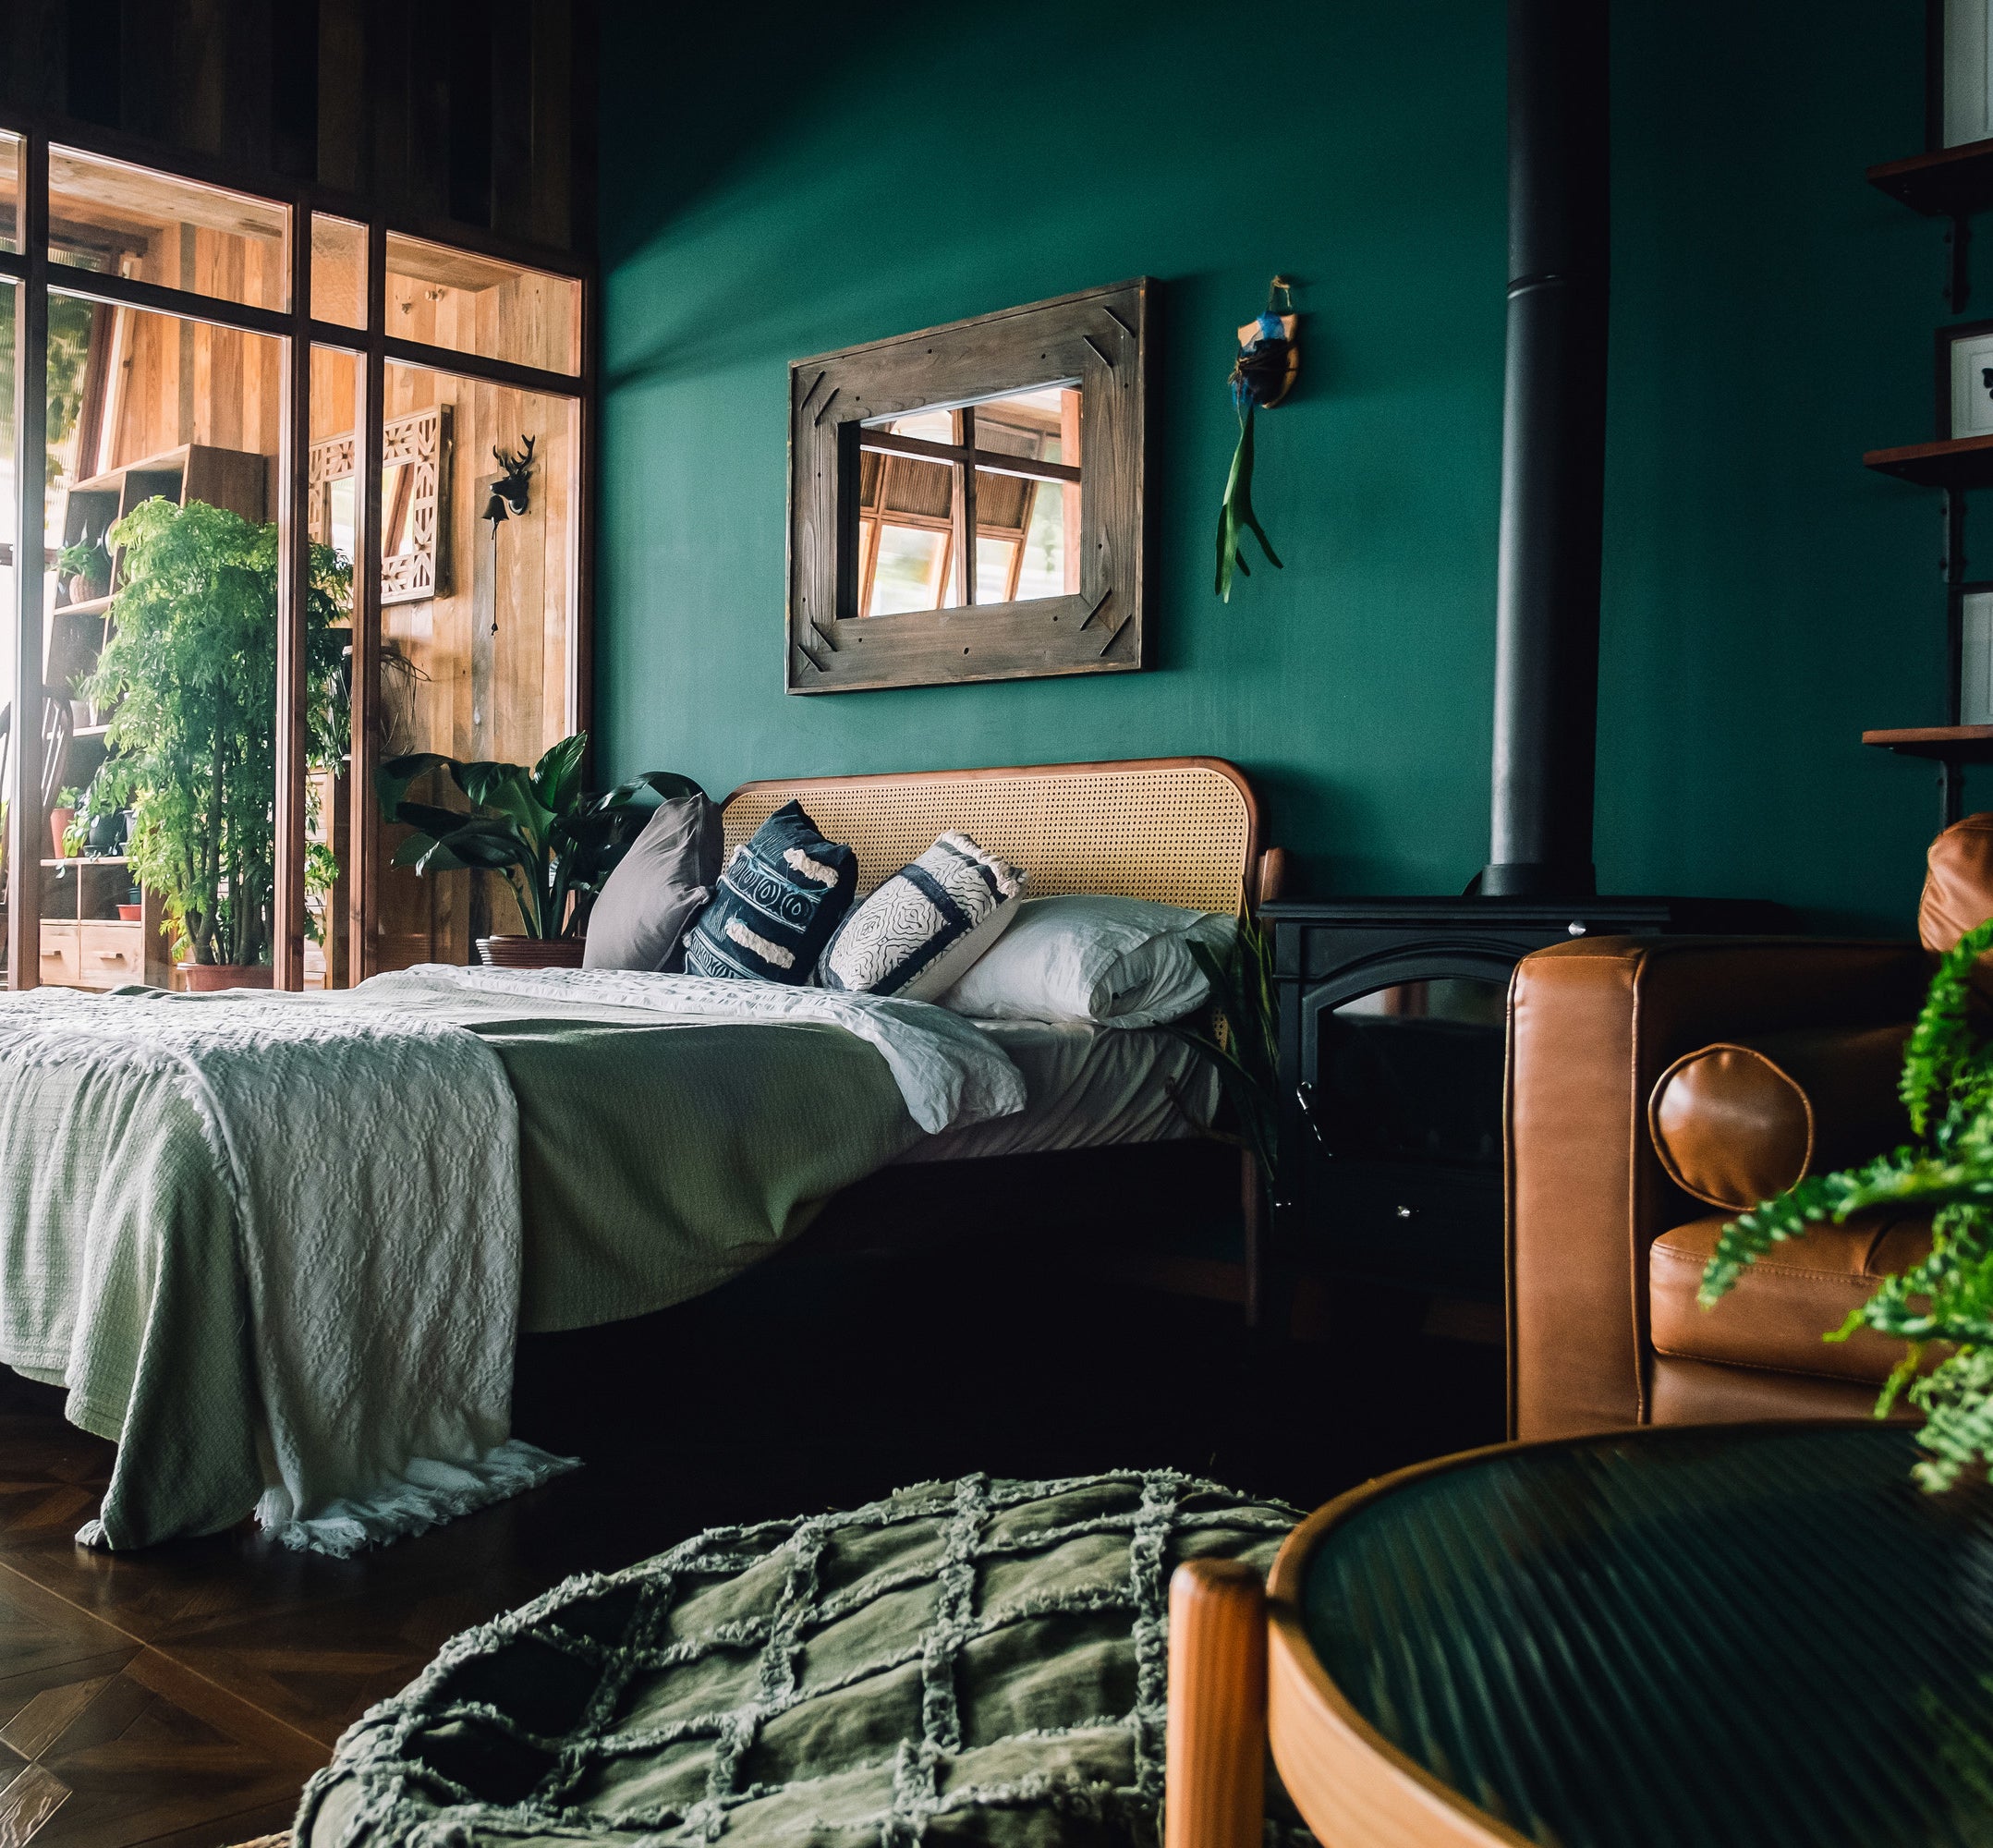 Bedroom with dark green accents and wooden furniture